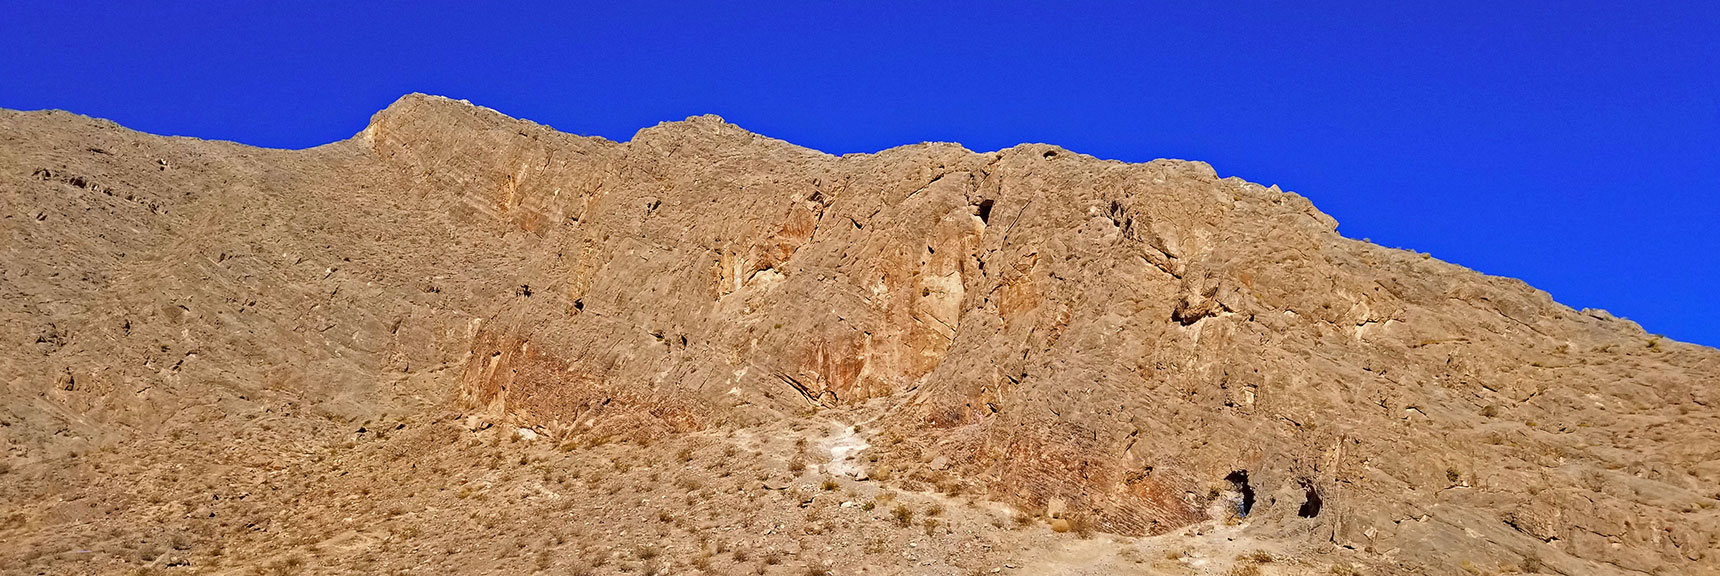 Circling Around Lone Mountain Clockwise, Second View. Watch for Summit Routes | Lone Mountain | Las Vegas, Nevada